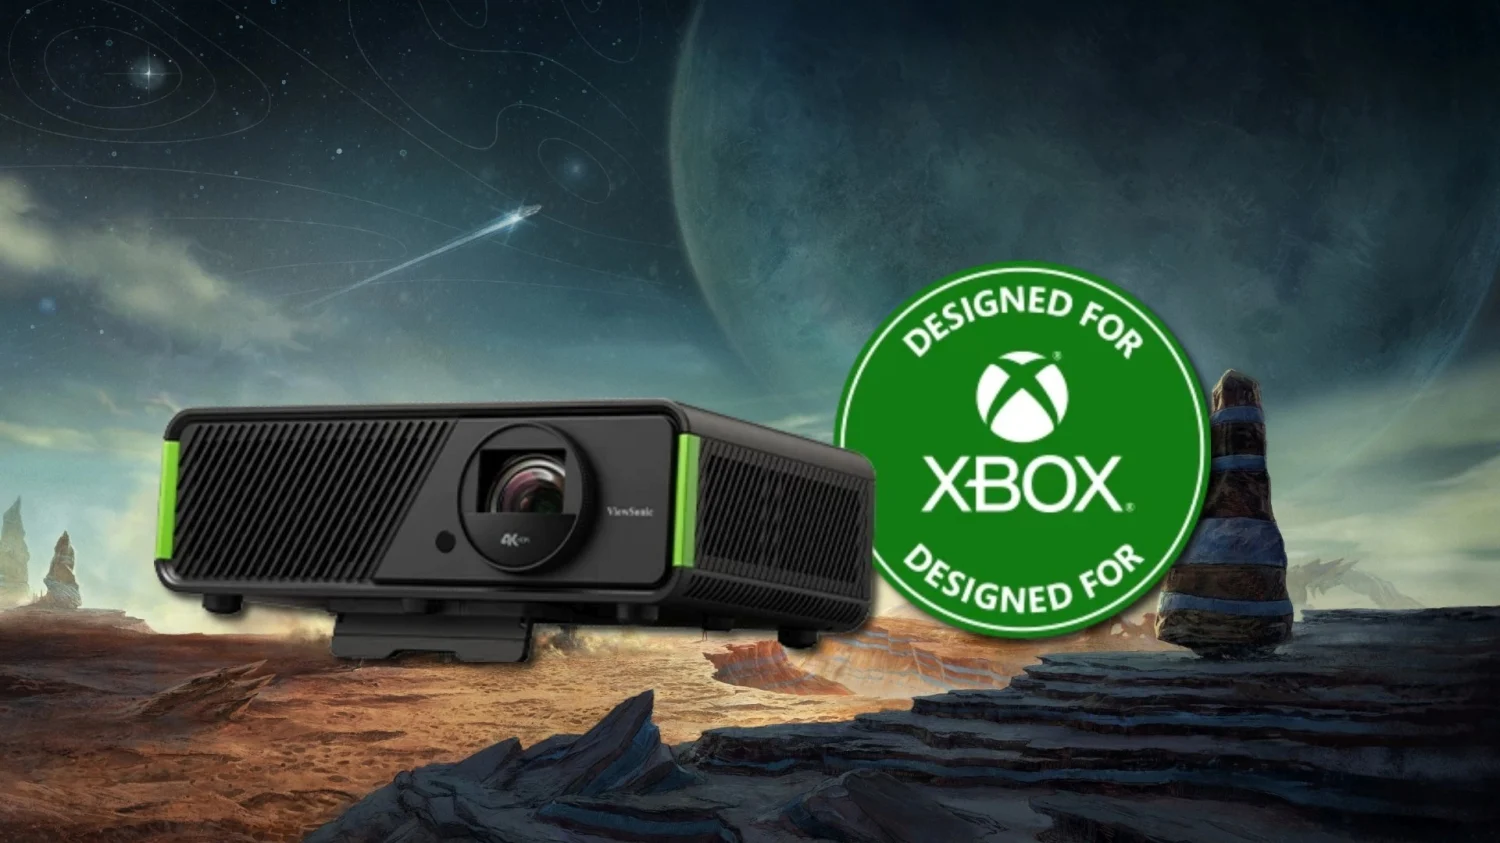 ViewSonic launches its first “Designed for Xbox” projector – 3D/HDTV